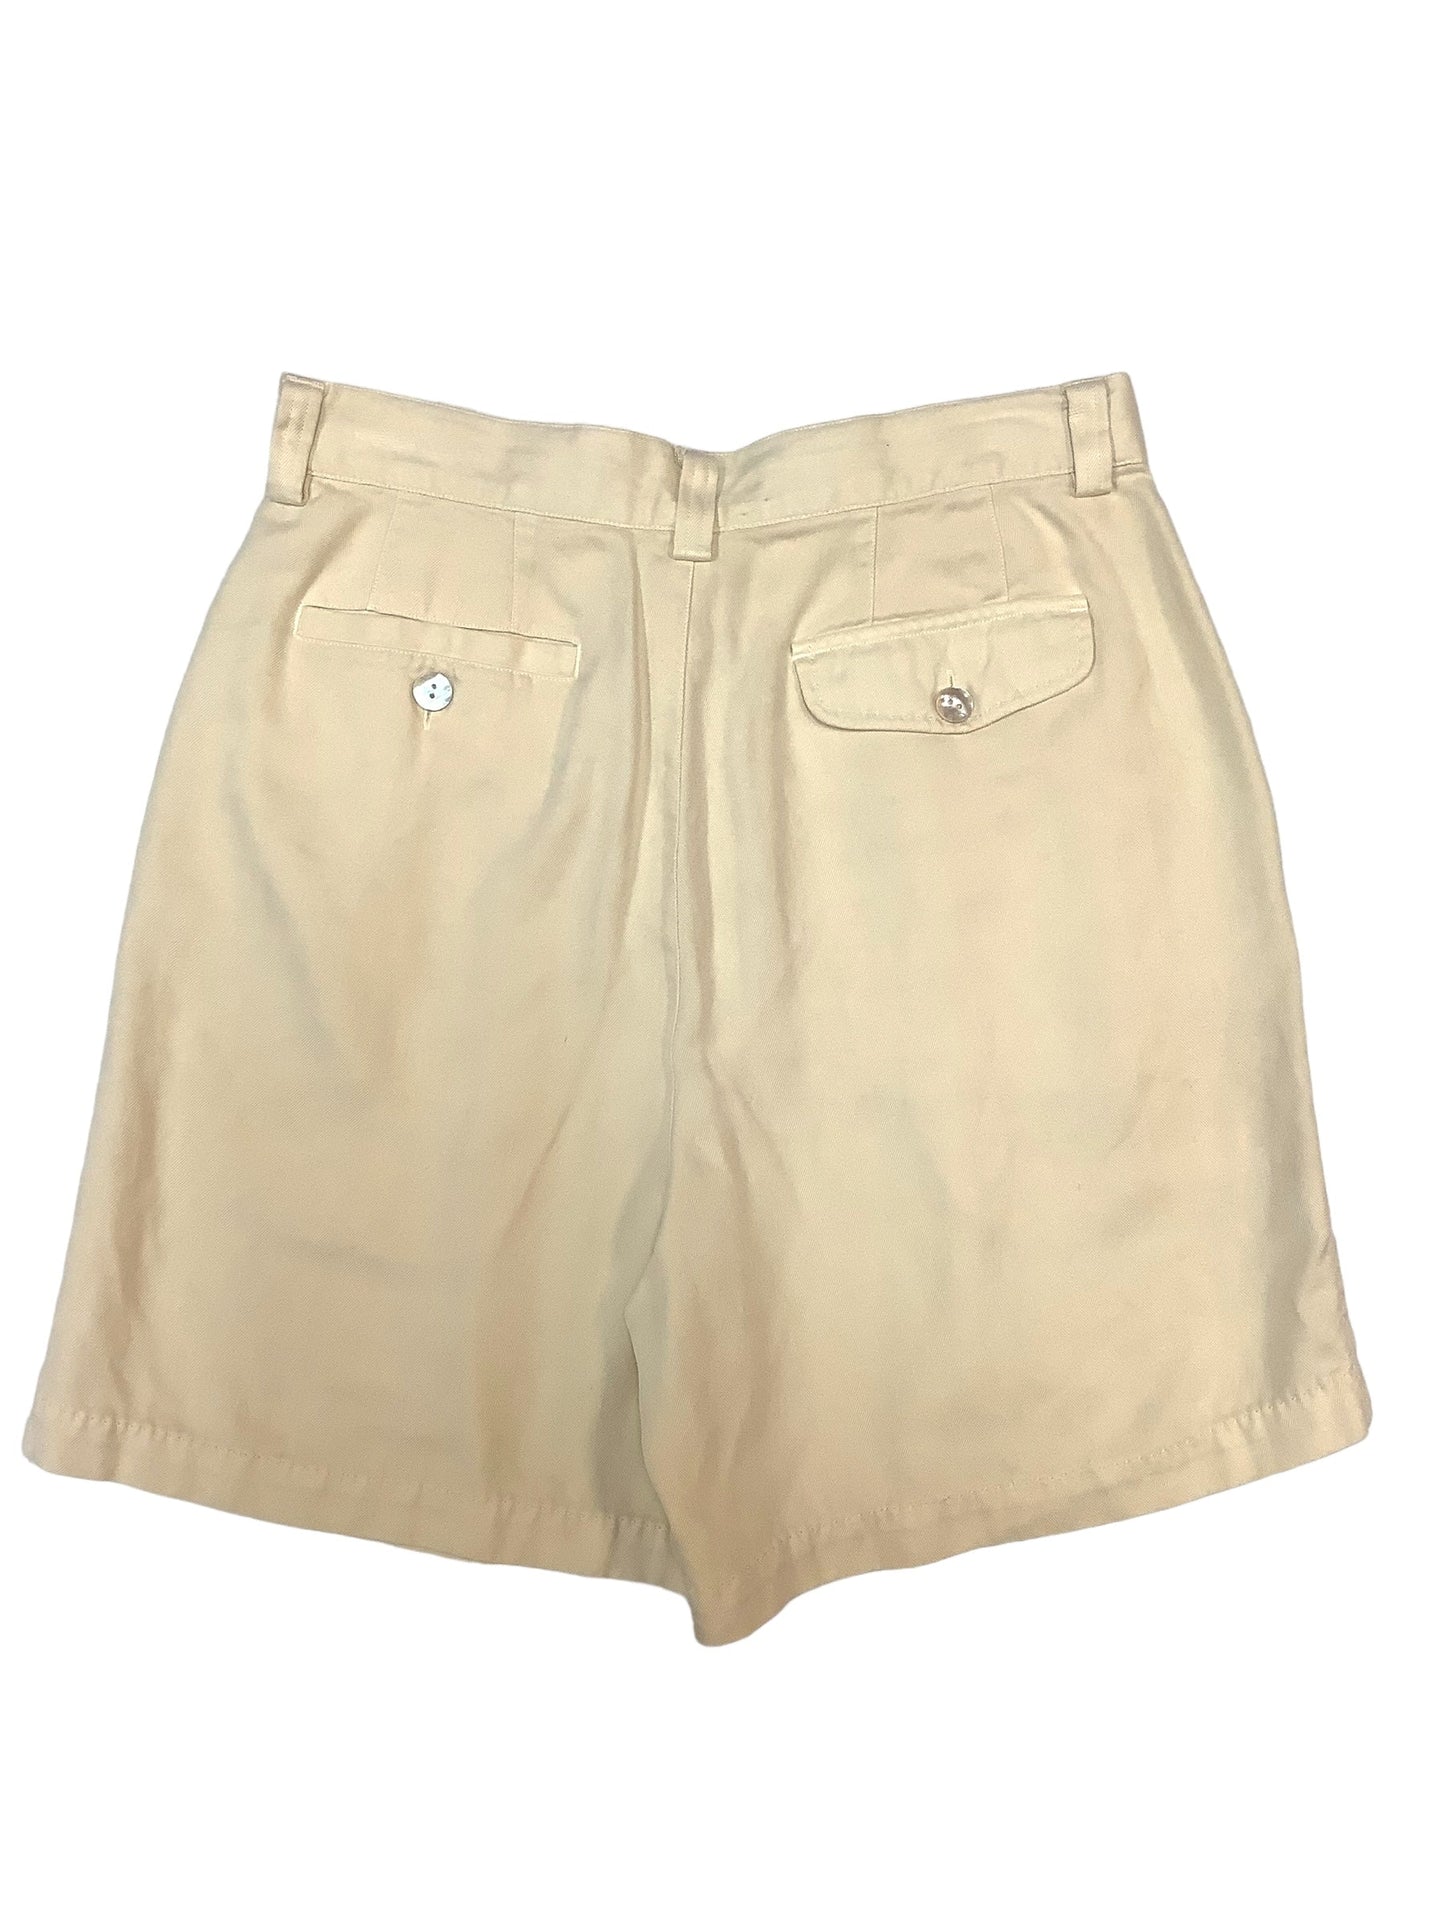 Shorts By Tommy Bahama  Size: 6